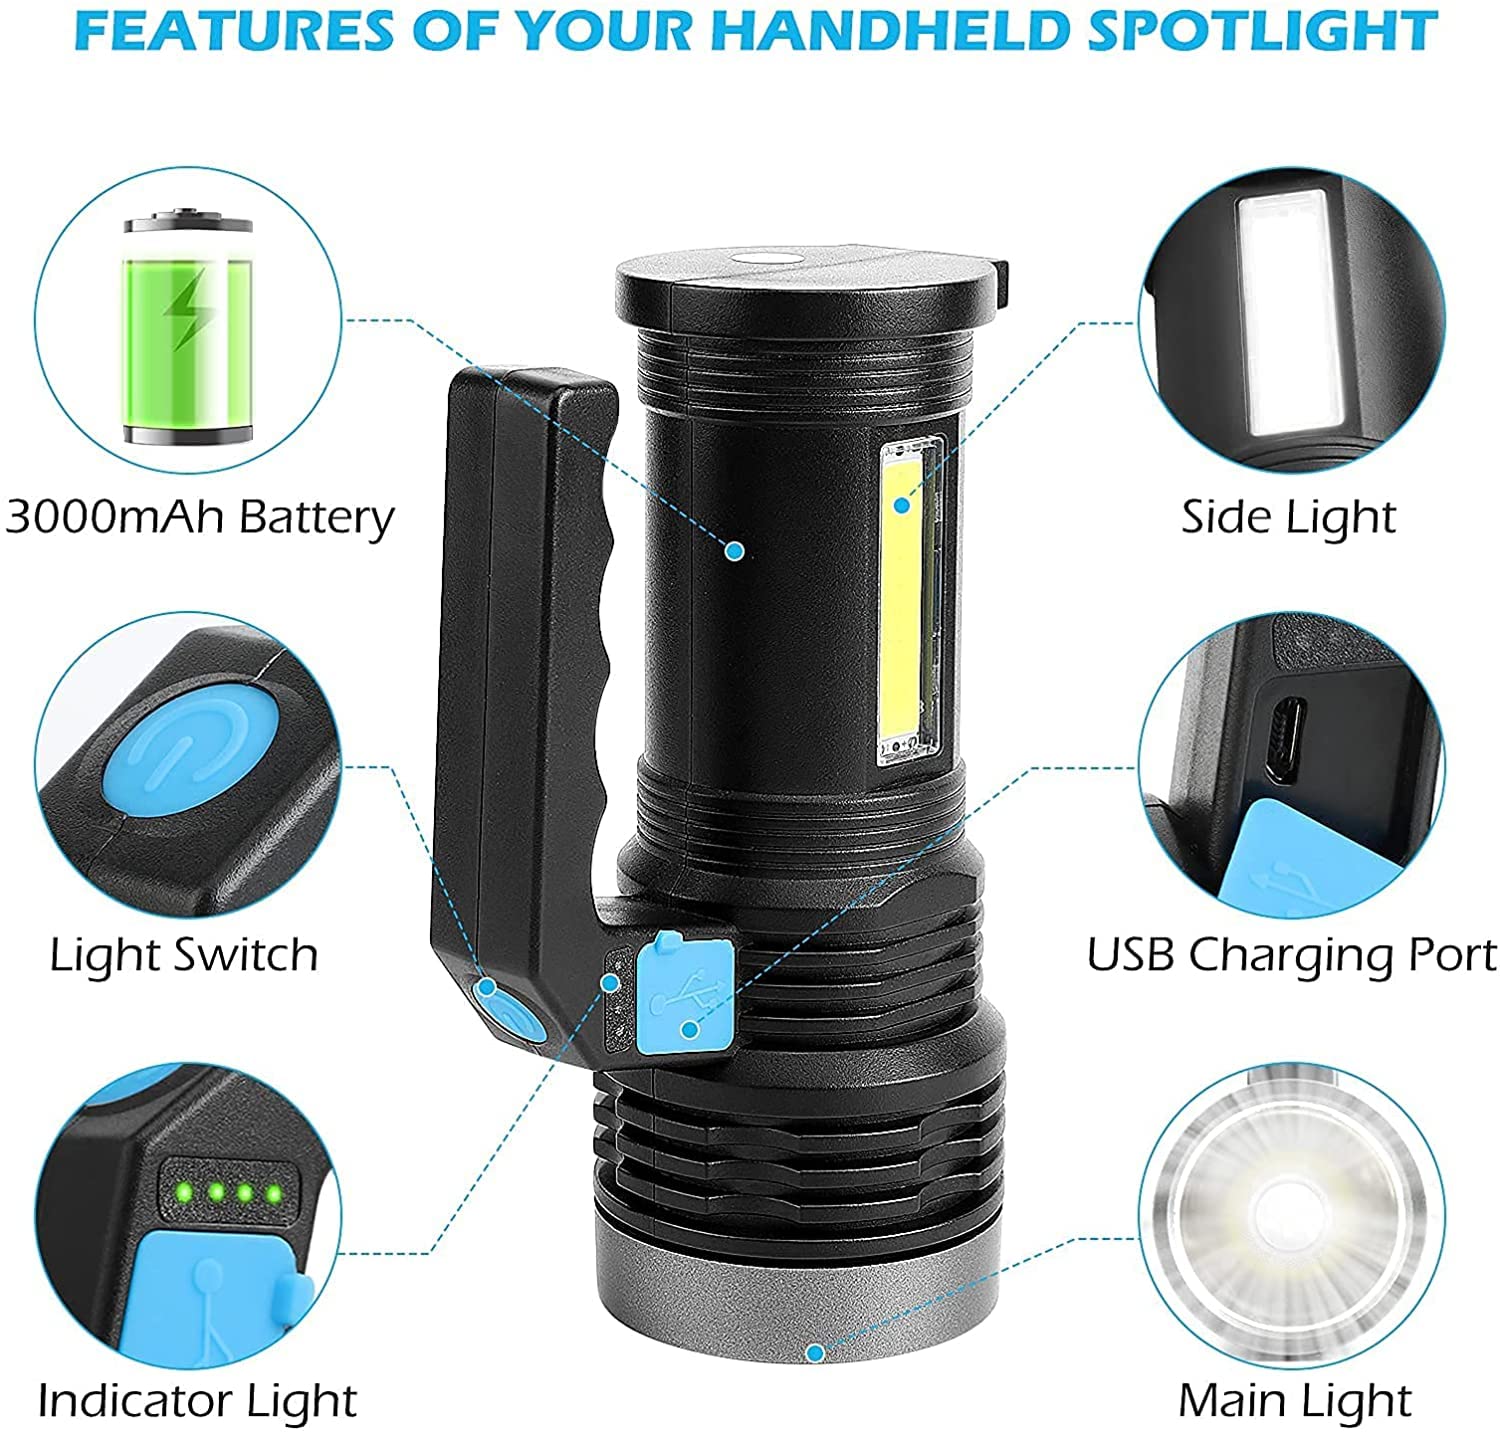 Wrrozz LED Flashlight High Lumens - USB Rechargeable Flashlight for Camping, Hiking, Walking - Powerful Emergency Flashlight with 4 Modes for Outdoor Use - Bright Flashlight with Sidelight Lantern